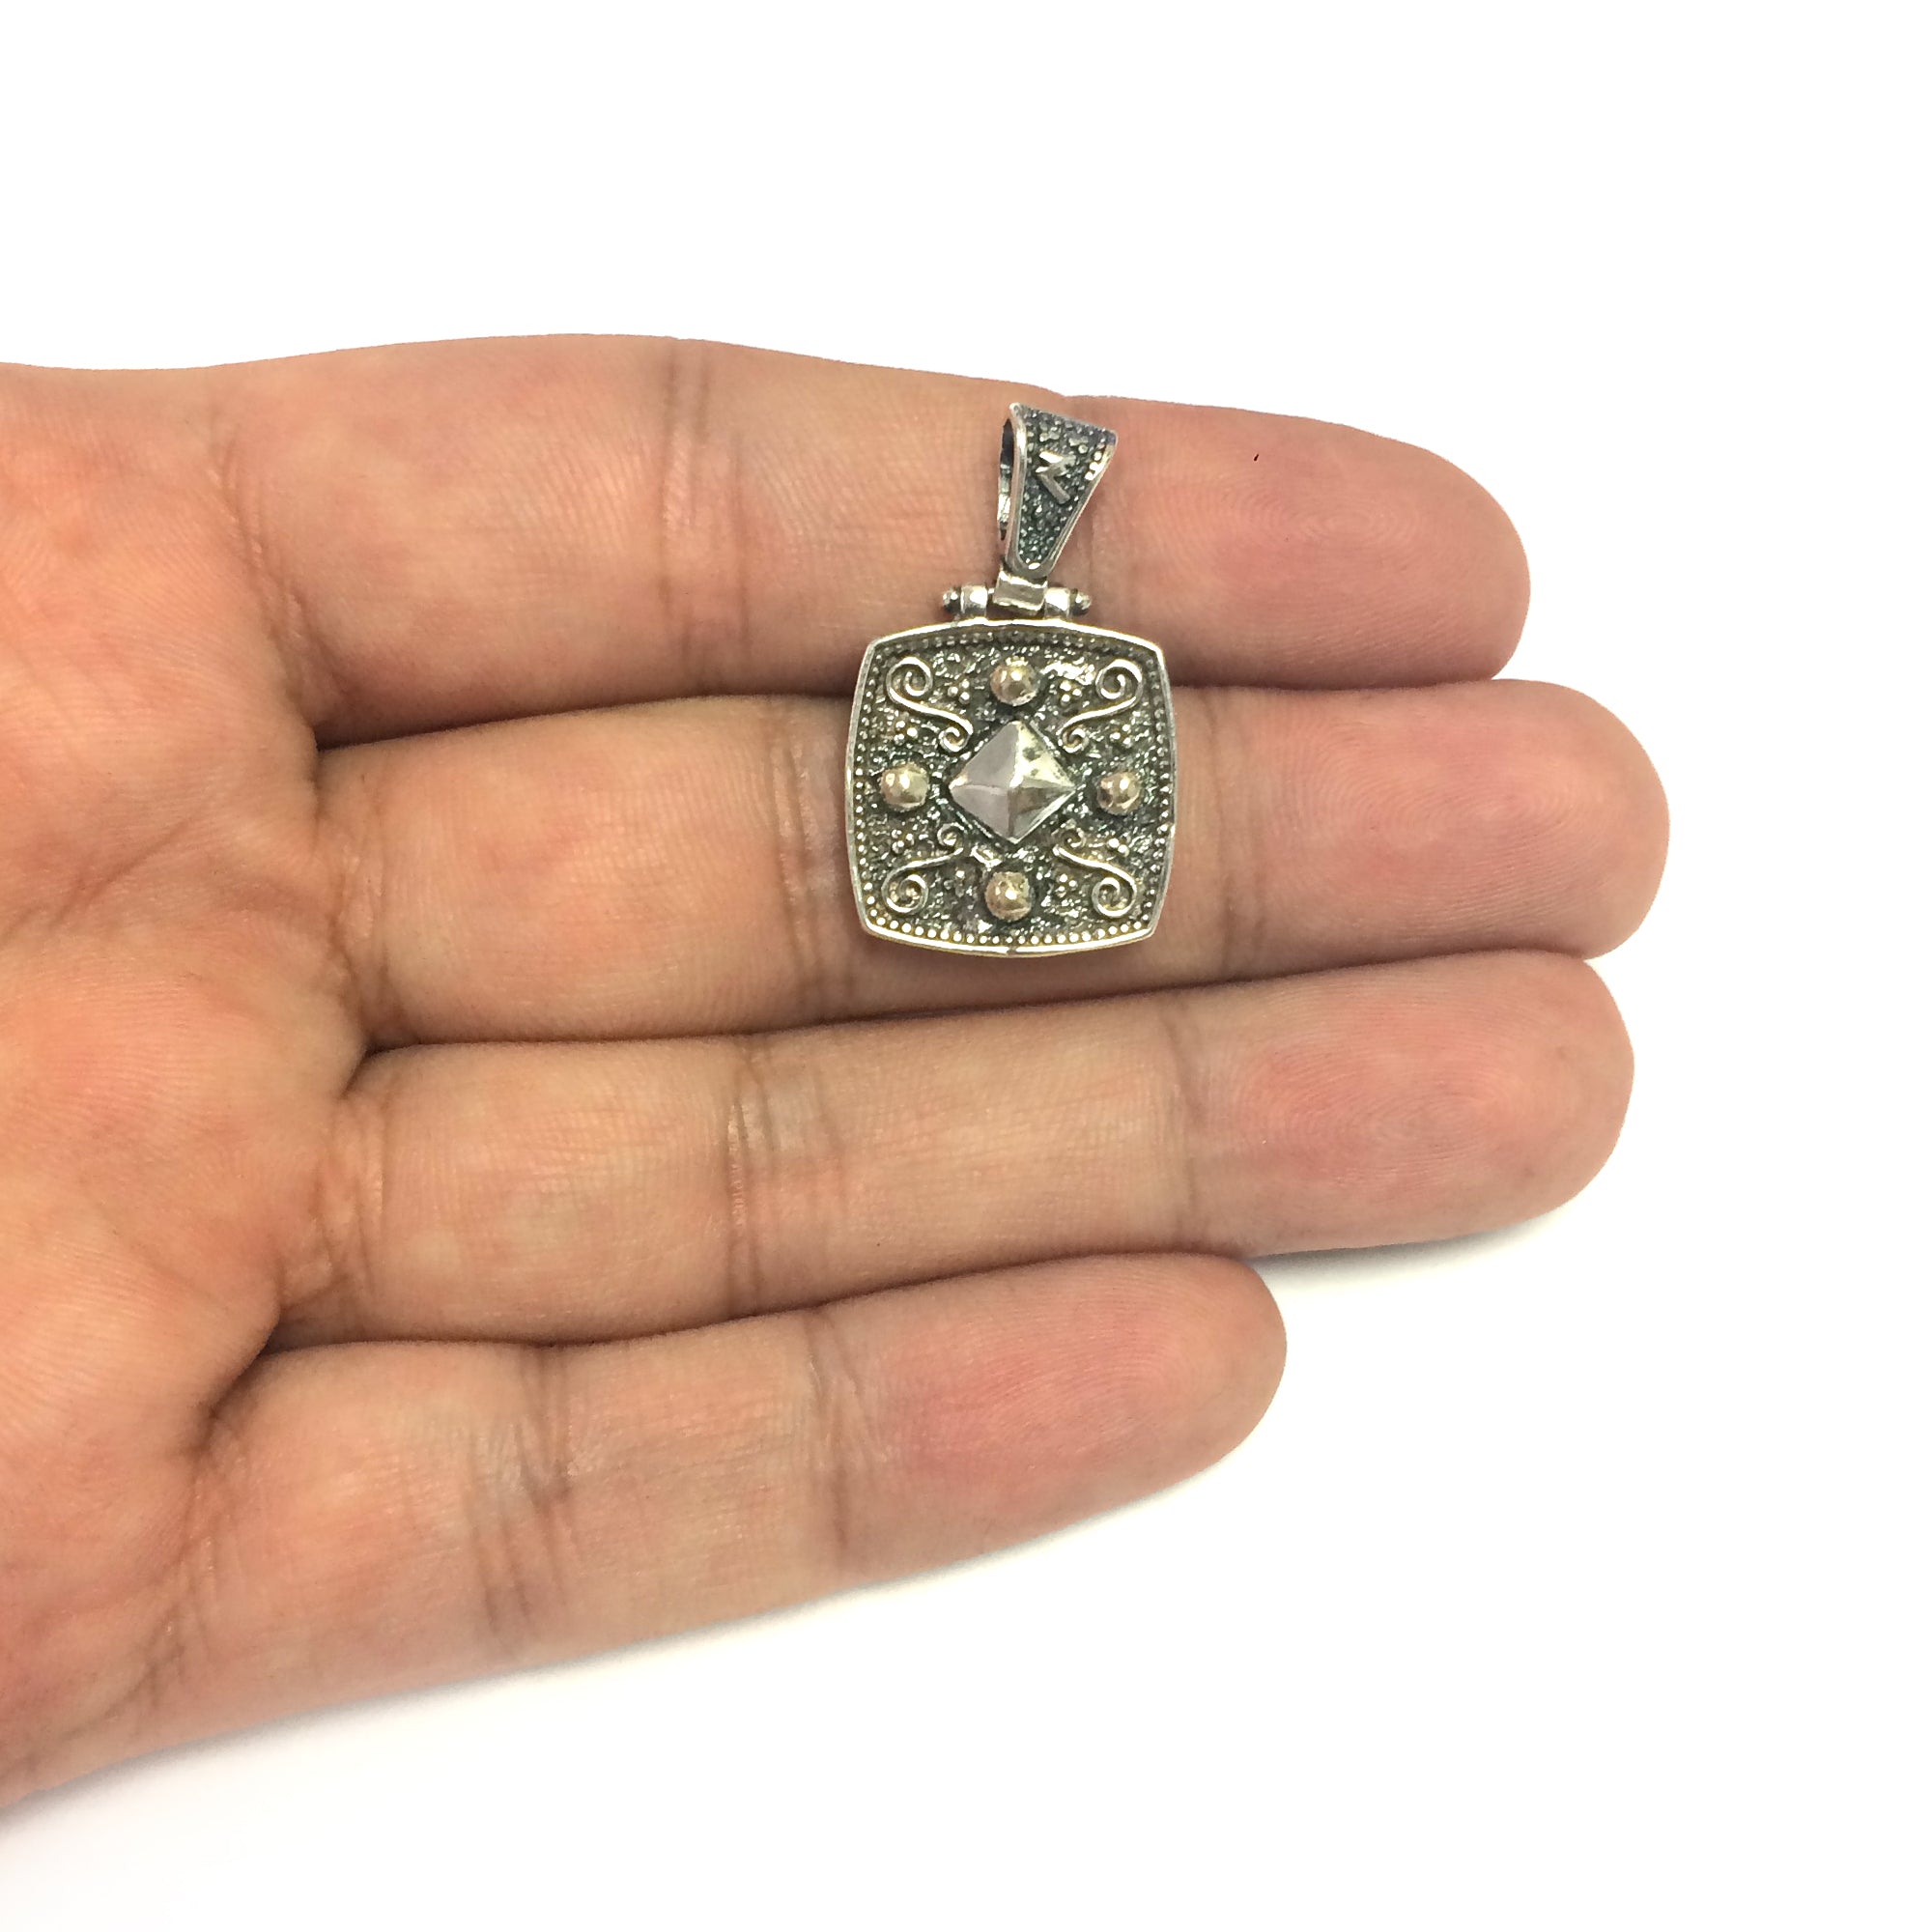 Oxidized Sterling Silver Byzantine Style Square Pendant fine designer jewelry for men and women